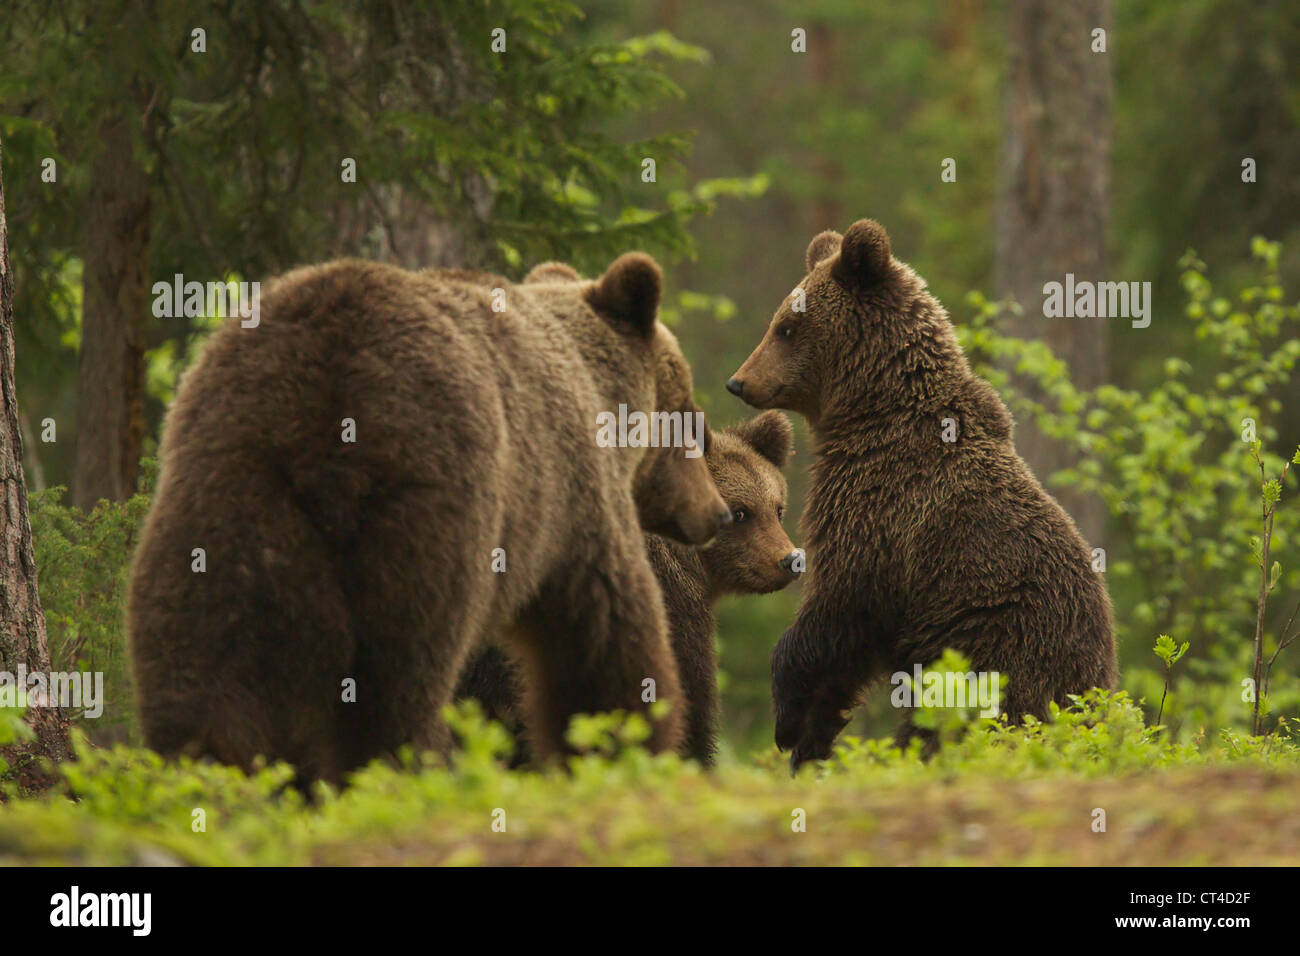 Family of Brown bears, Ursus arctos, in forest, Suomussalmi, Finland Stock Photo